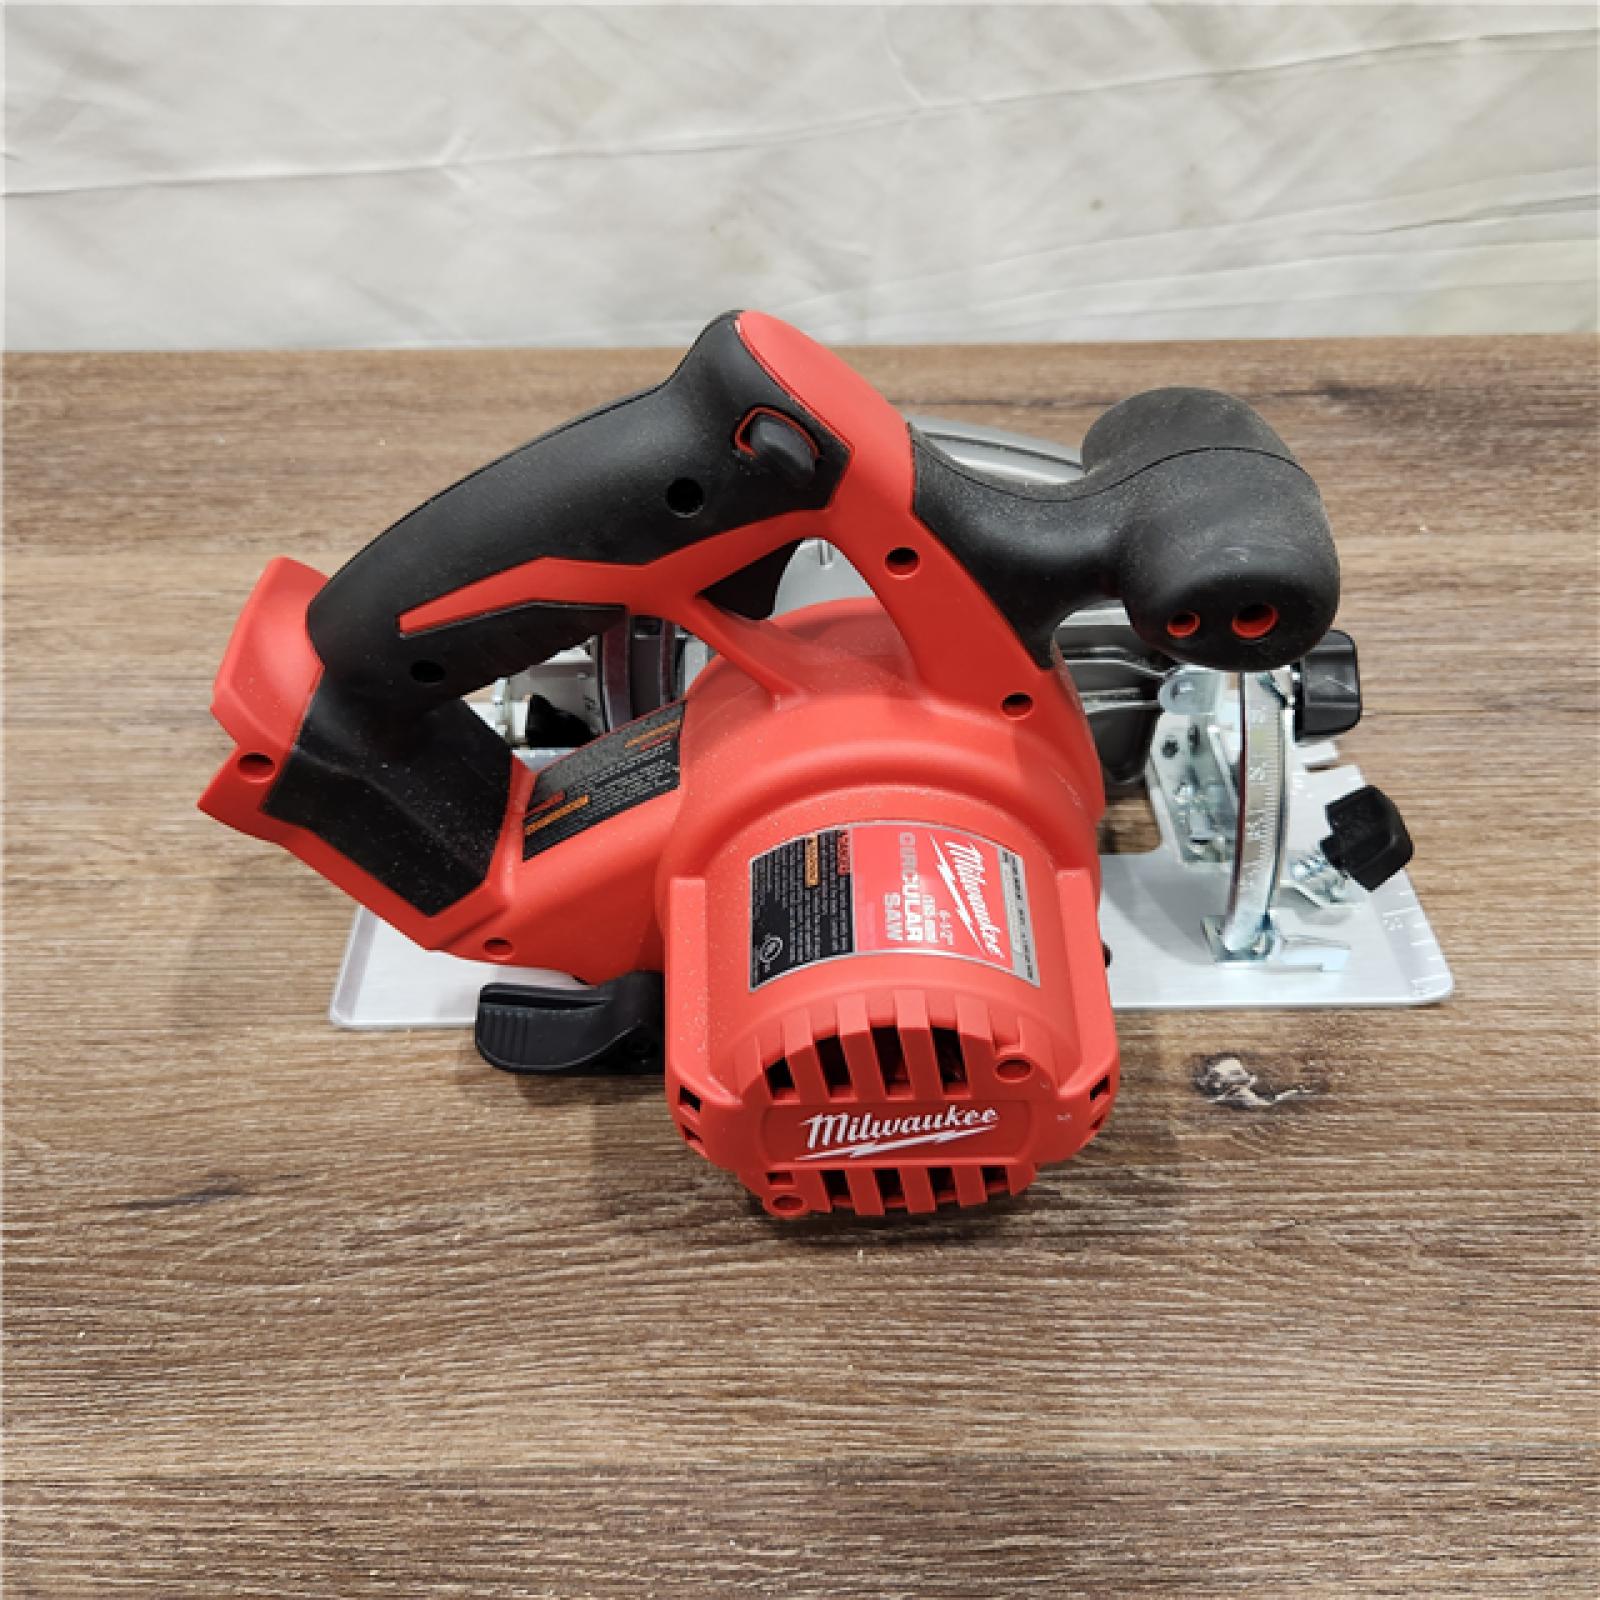 AS-IS Milwaukee M18 6 1/2 Circular Saw (Tool Only)